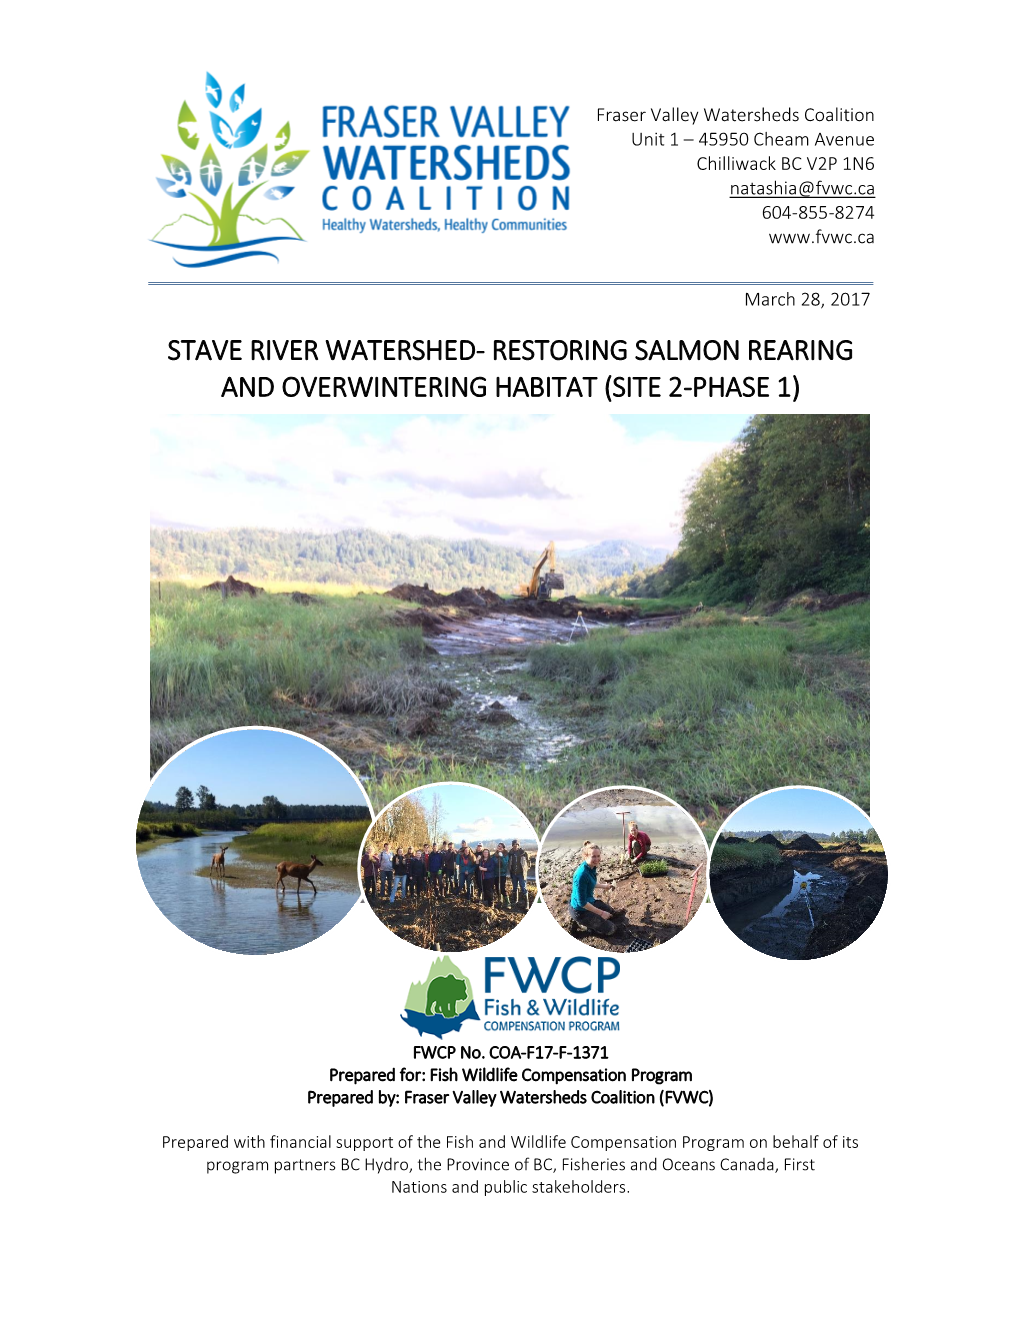 Stave River Watershed- Restoring Salmon Rearing and Overwintering Habitat (Site 2-Phase 1)